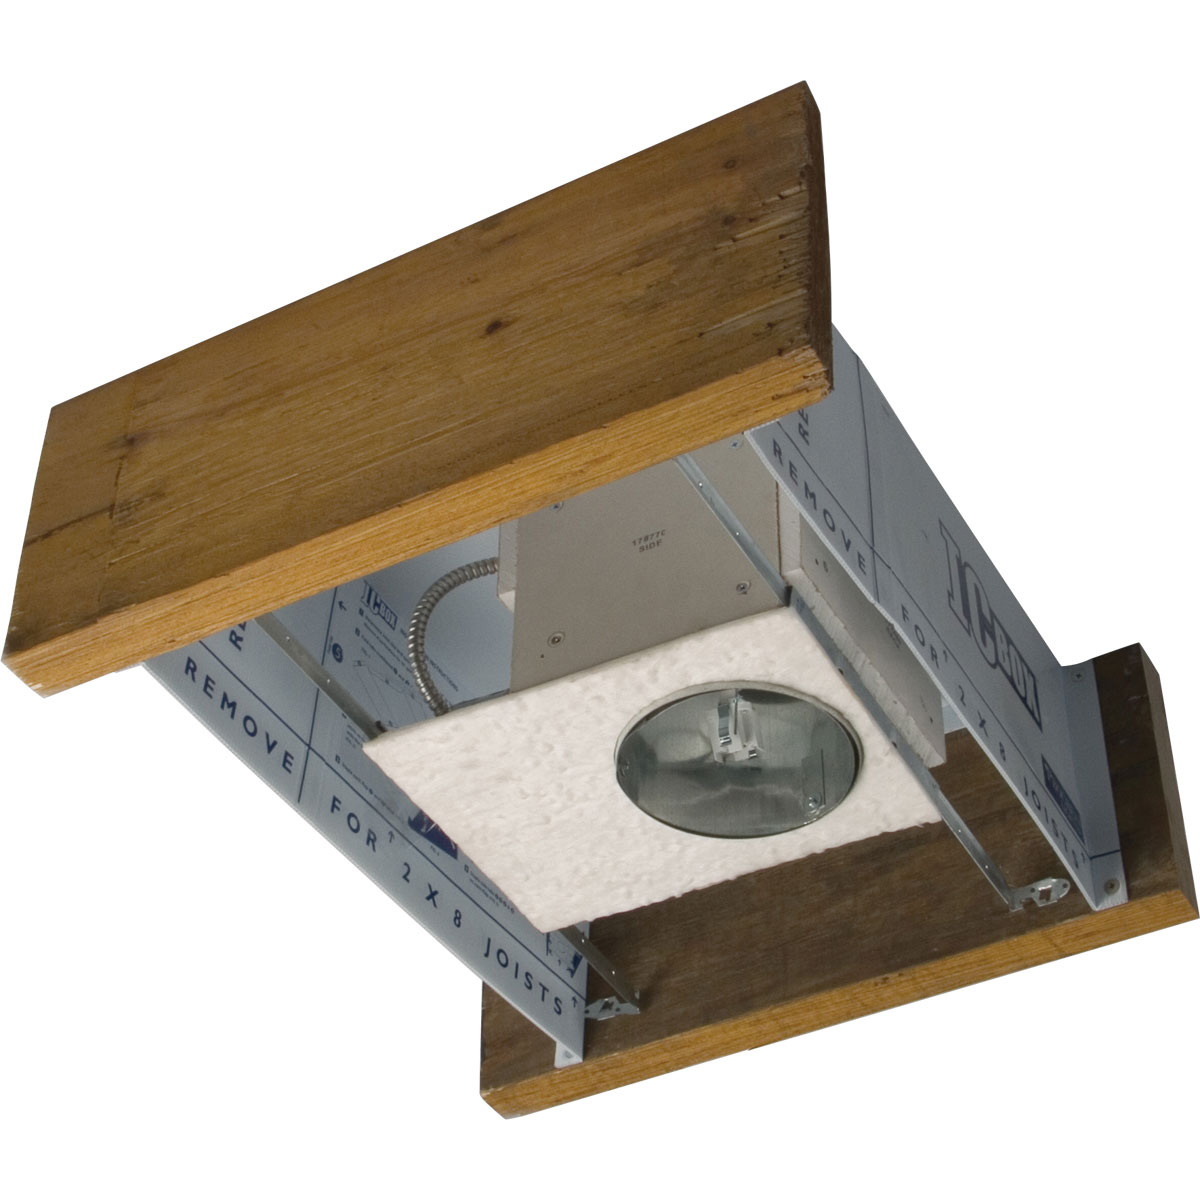 Recessed Enclosure accessory for Non-IC Housings in IC Applications. Used to create a barrier to prevent insulation from making contact with recessed fixtures.